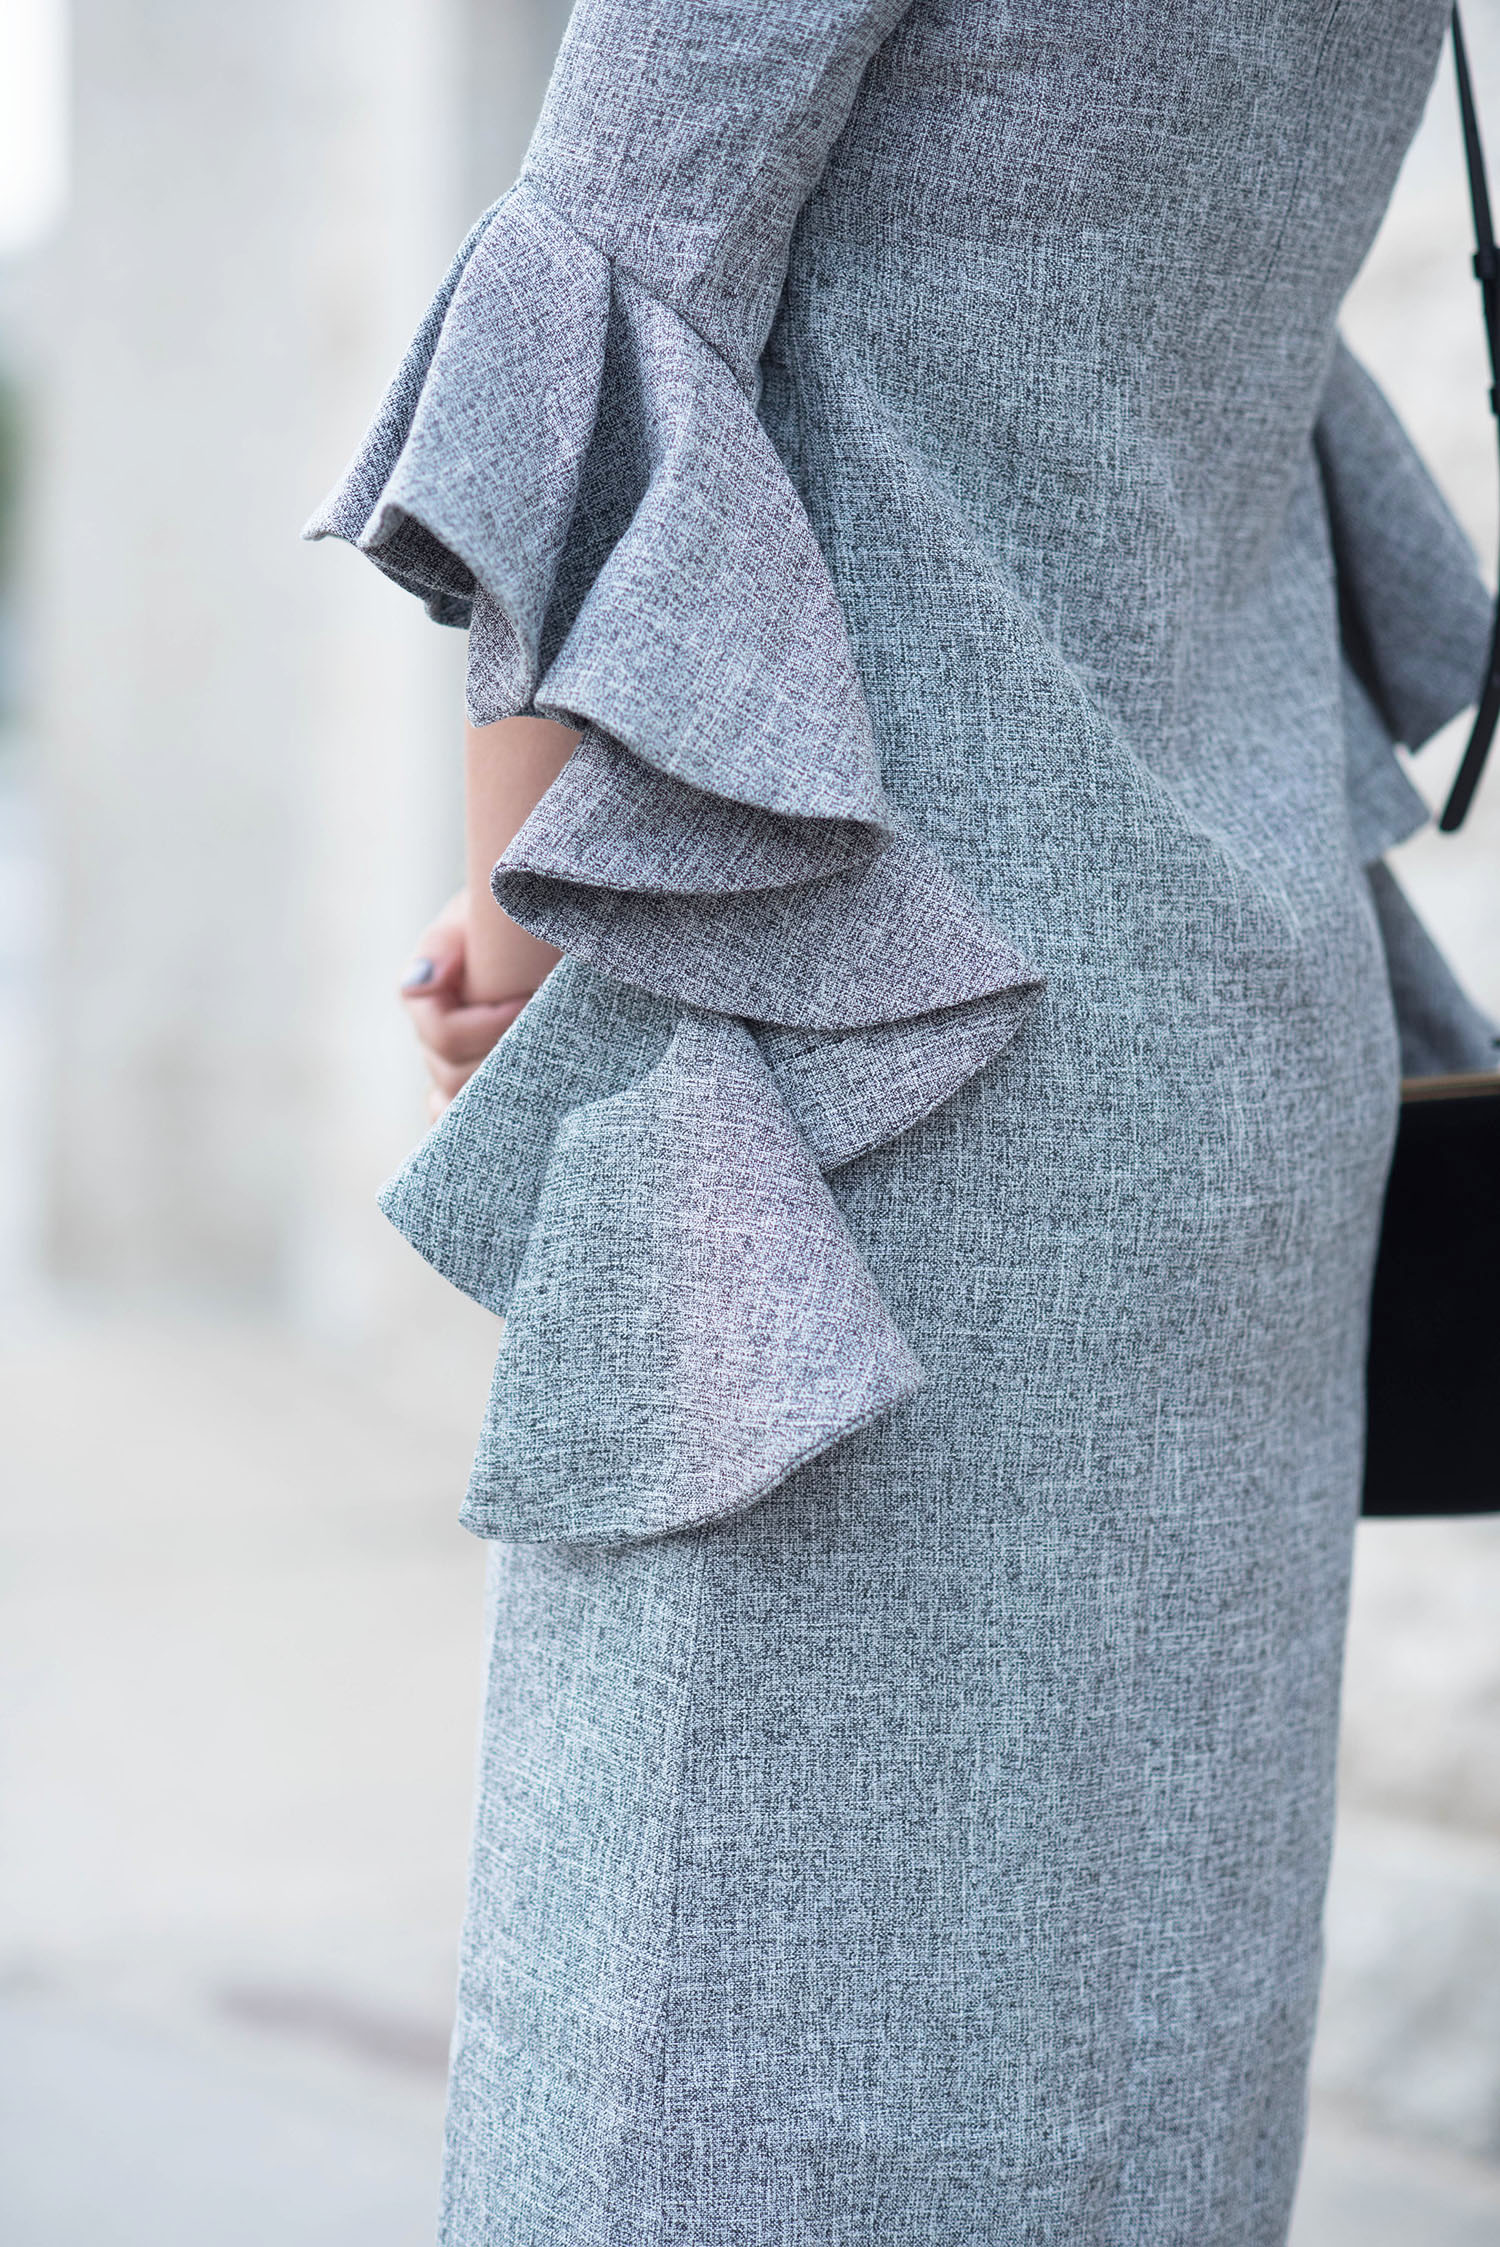 Outfit details on fashion blogger Cee Fardoe of Coco & Vera wearing a grey ruffle sleeve dress from Metisu